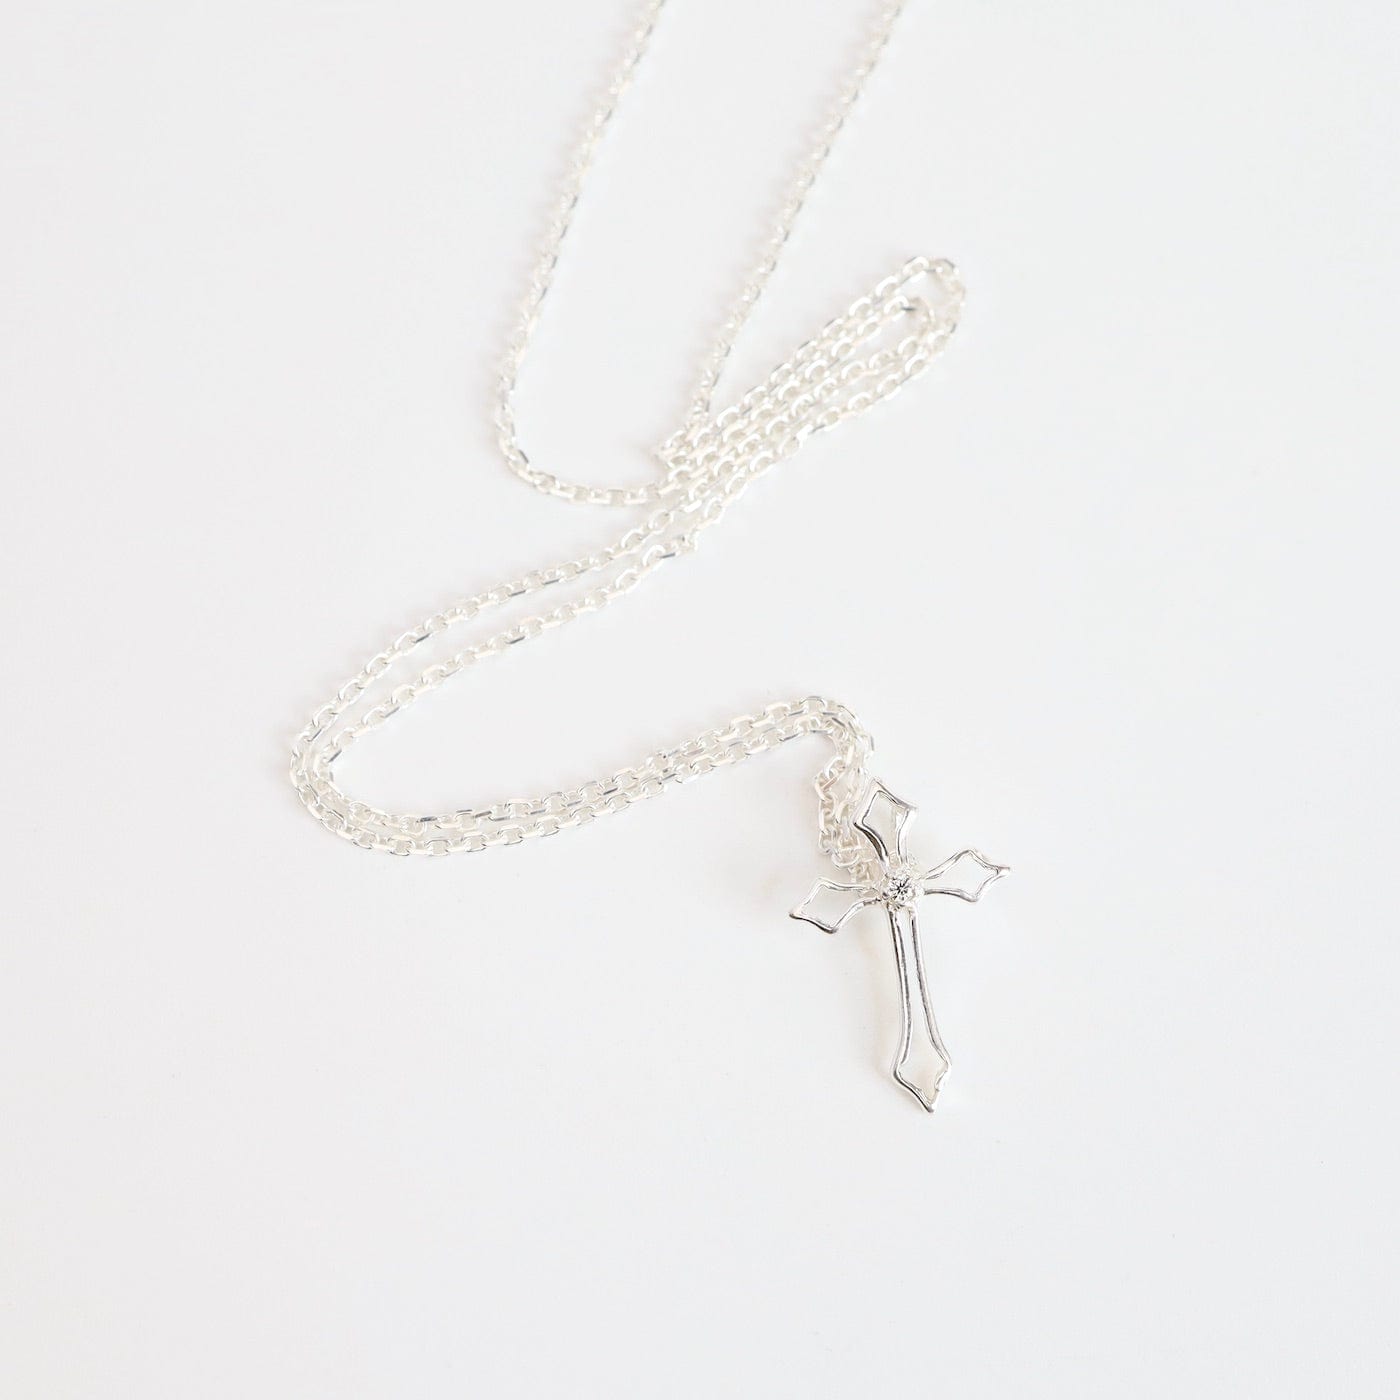 NKL Sterling Silver Cross with Crystal Necklace